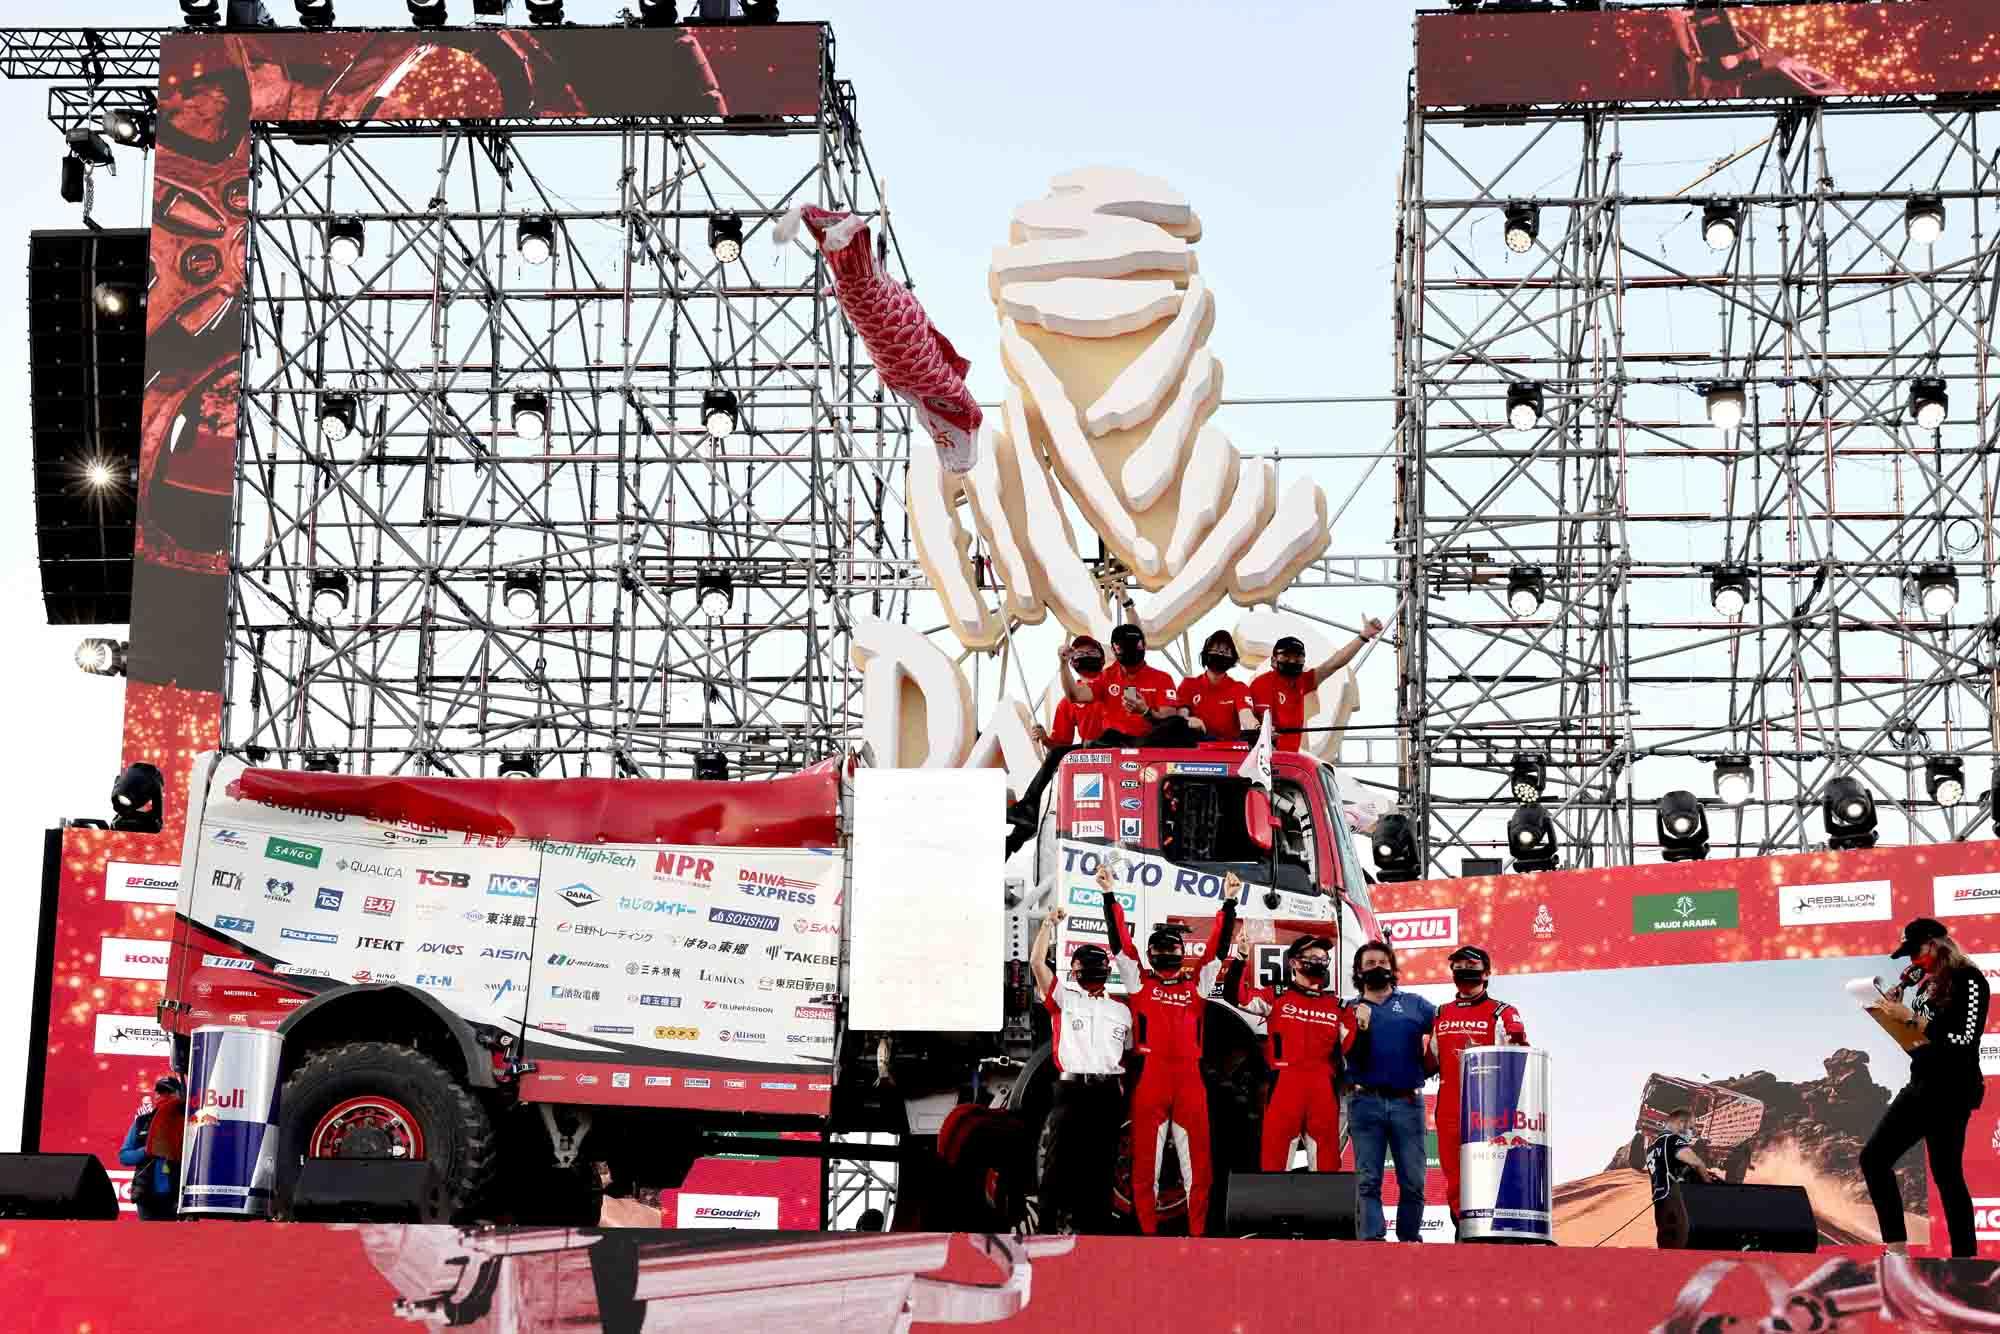 STAGE12・GOAL:HINO500 Series Truck Finishes at Jeddah in 12th Place Overall.　Seizes 12th straight win in the Under 10-litre Class.